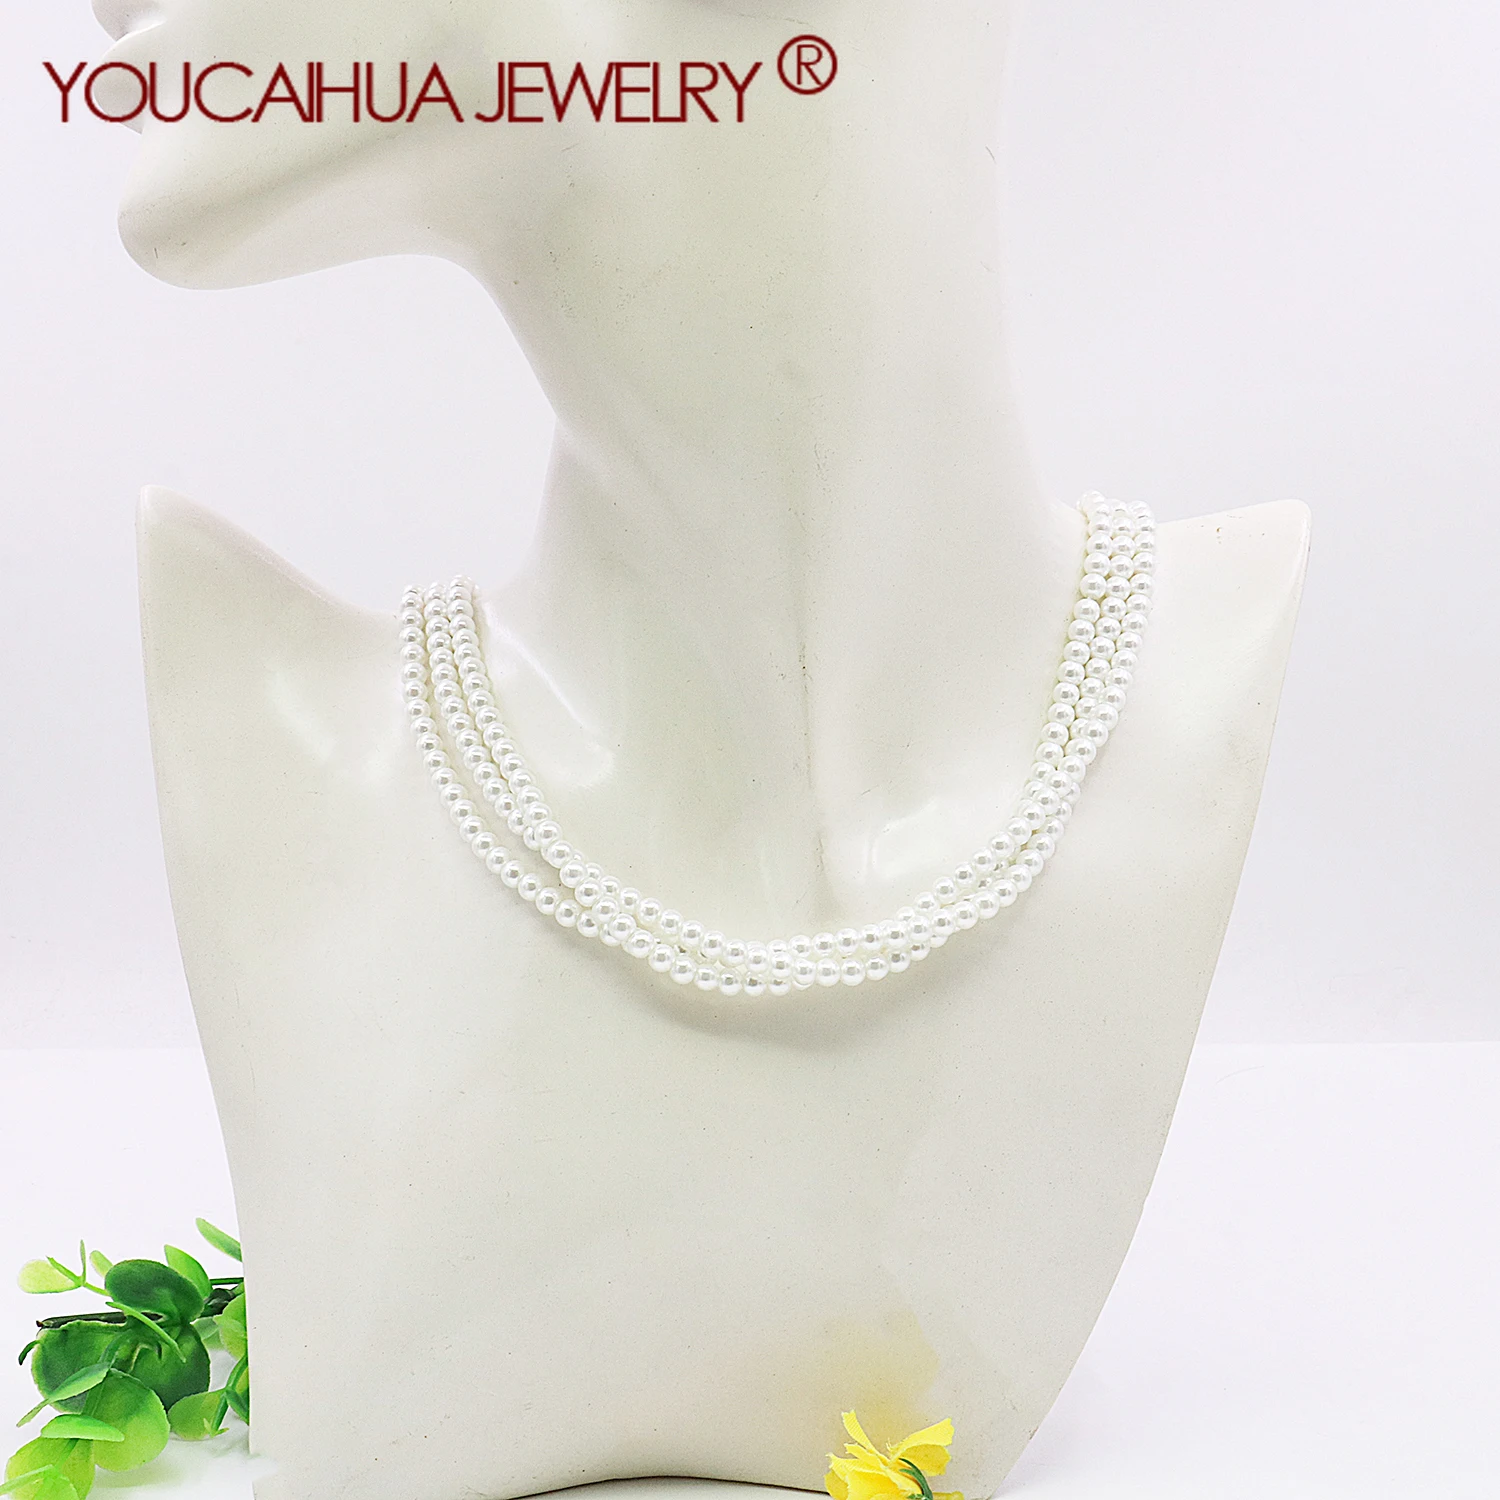 

6mm Hot White Shell Necklace/Neckchain 3 Layer Set,Round Bead Sweater Chain,Women's Gift,Elegant Party Banquet,Jewelry Making